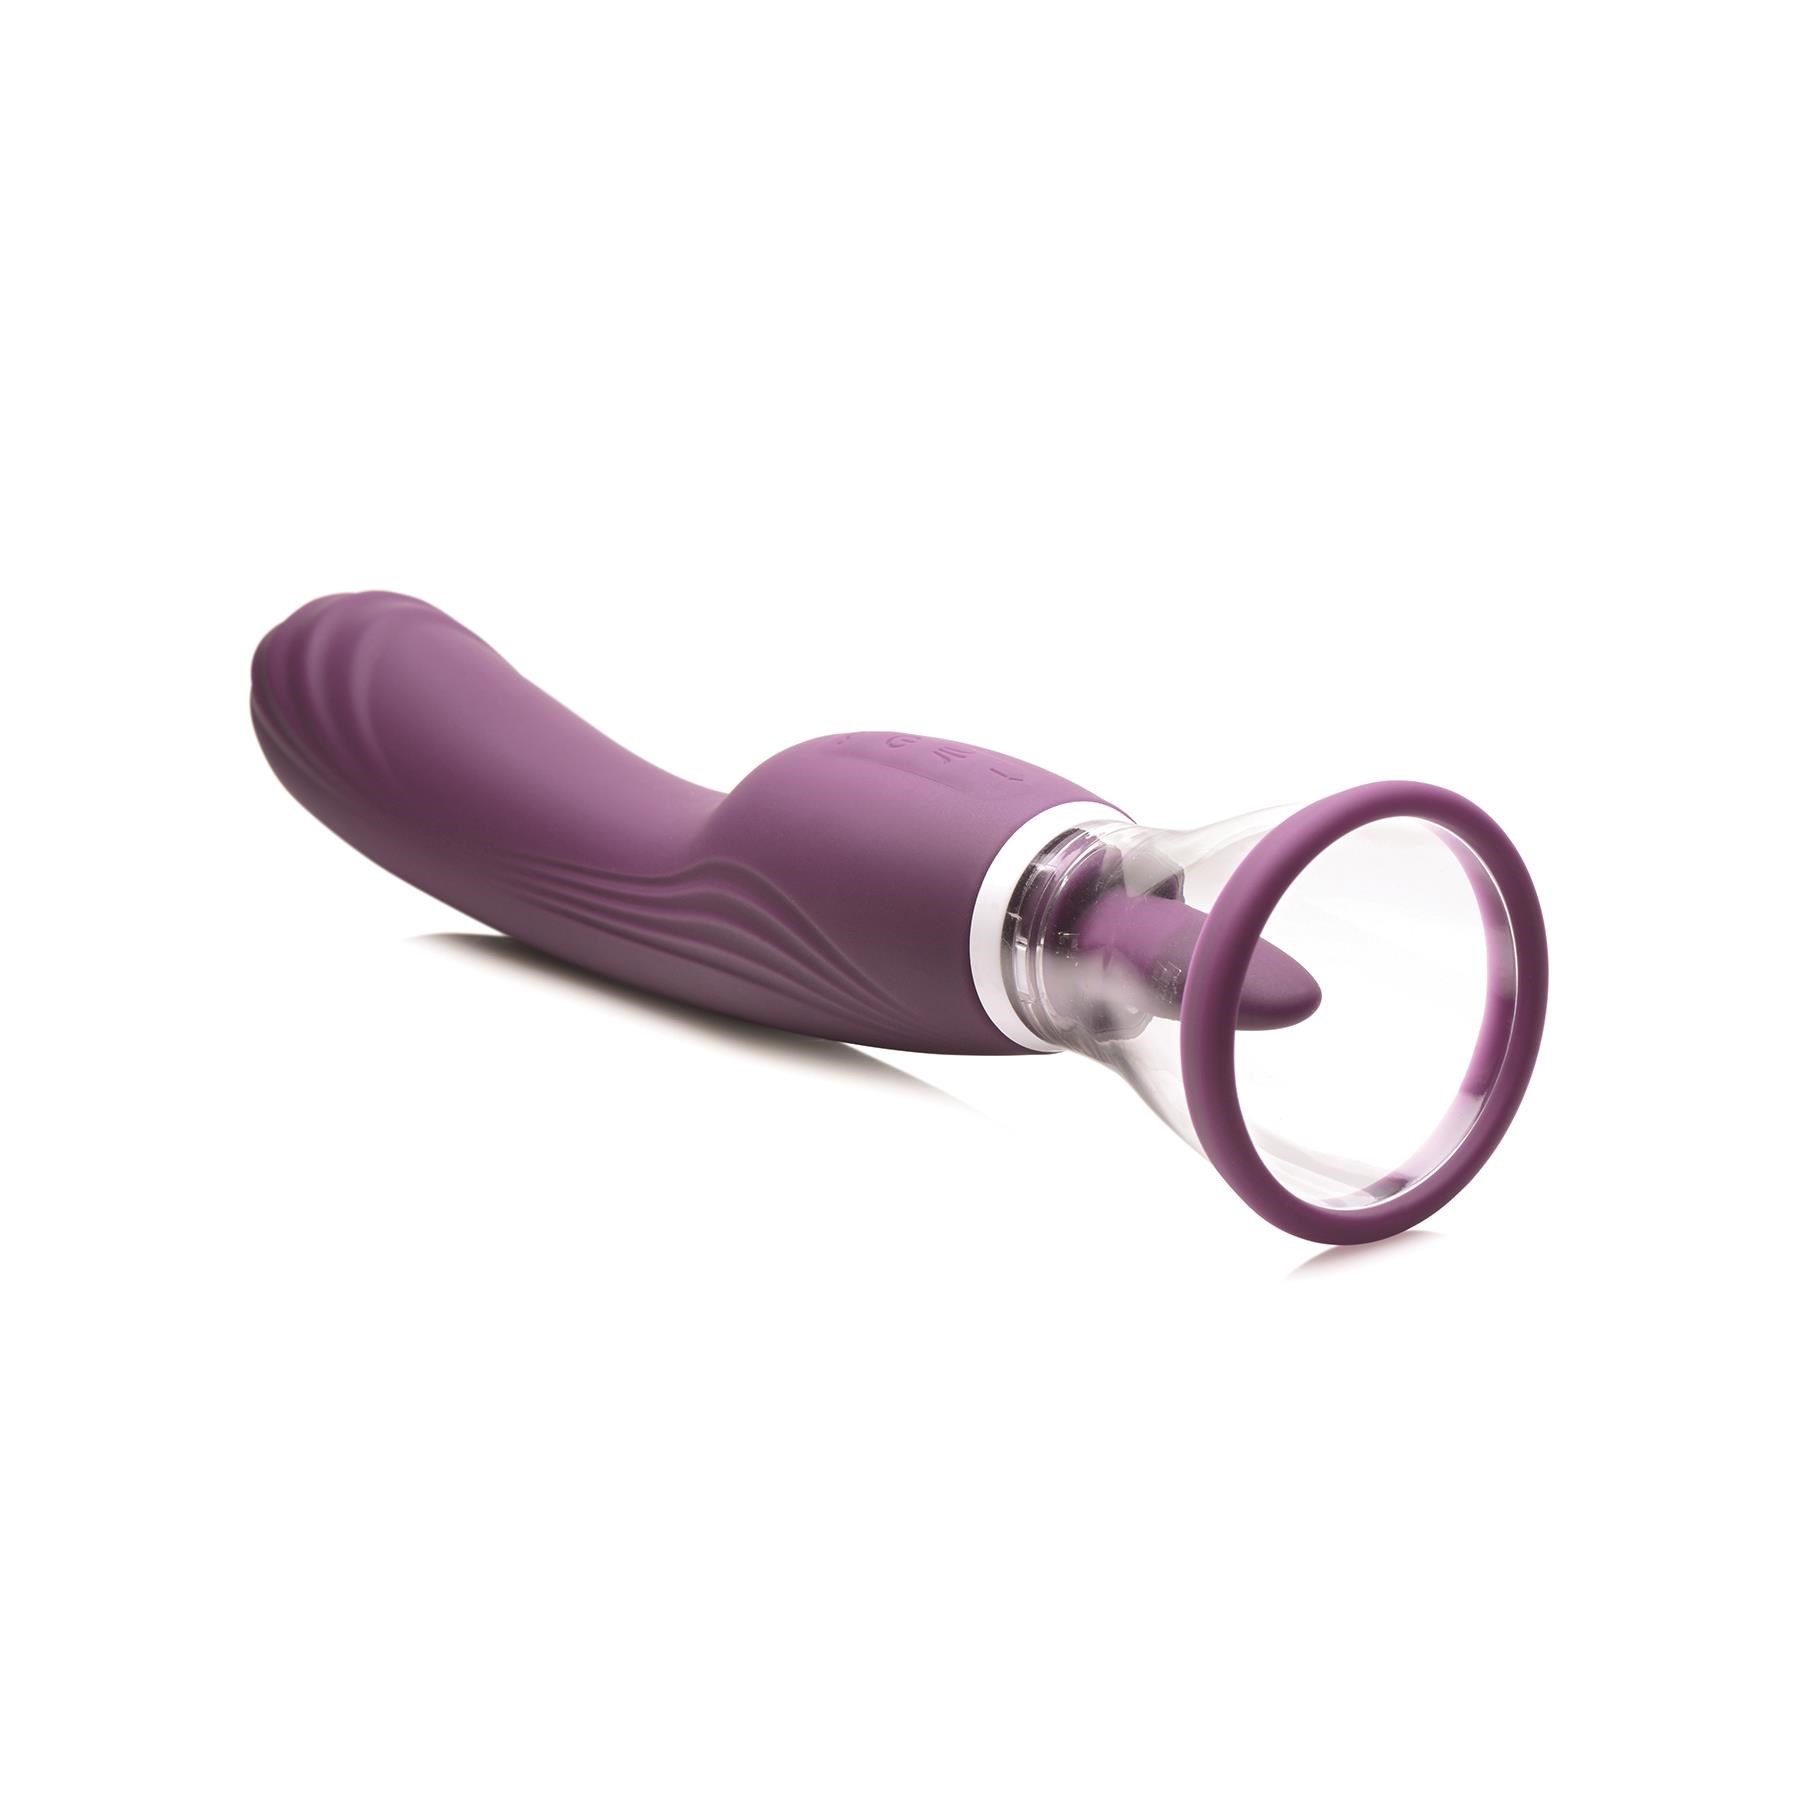 Shegasm Lickgasm Vibrating Pussy Pump with Small Cup